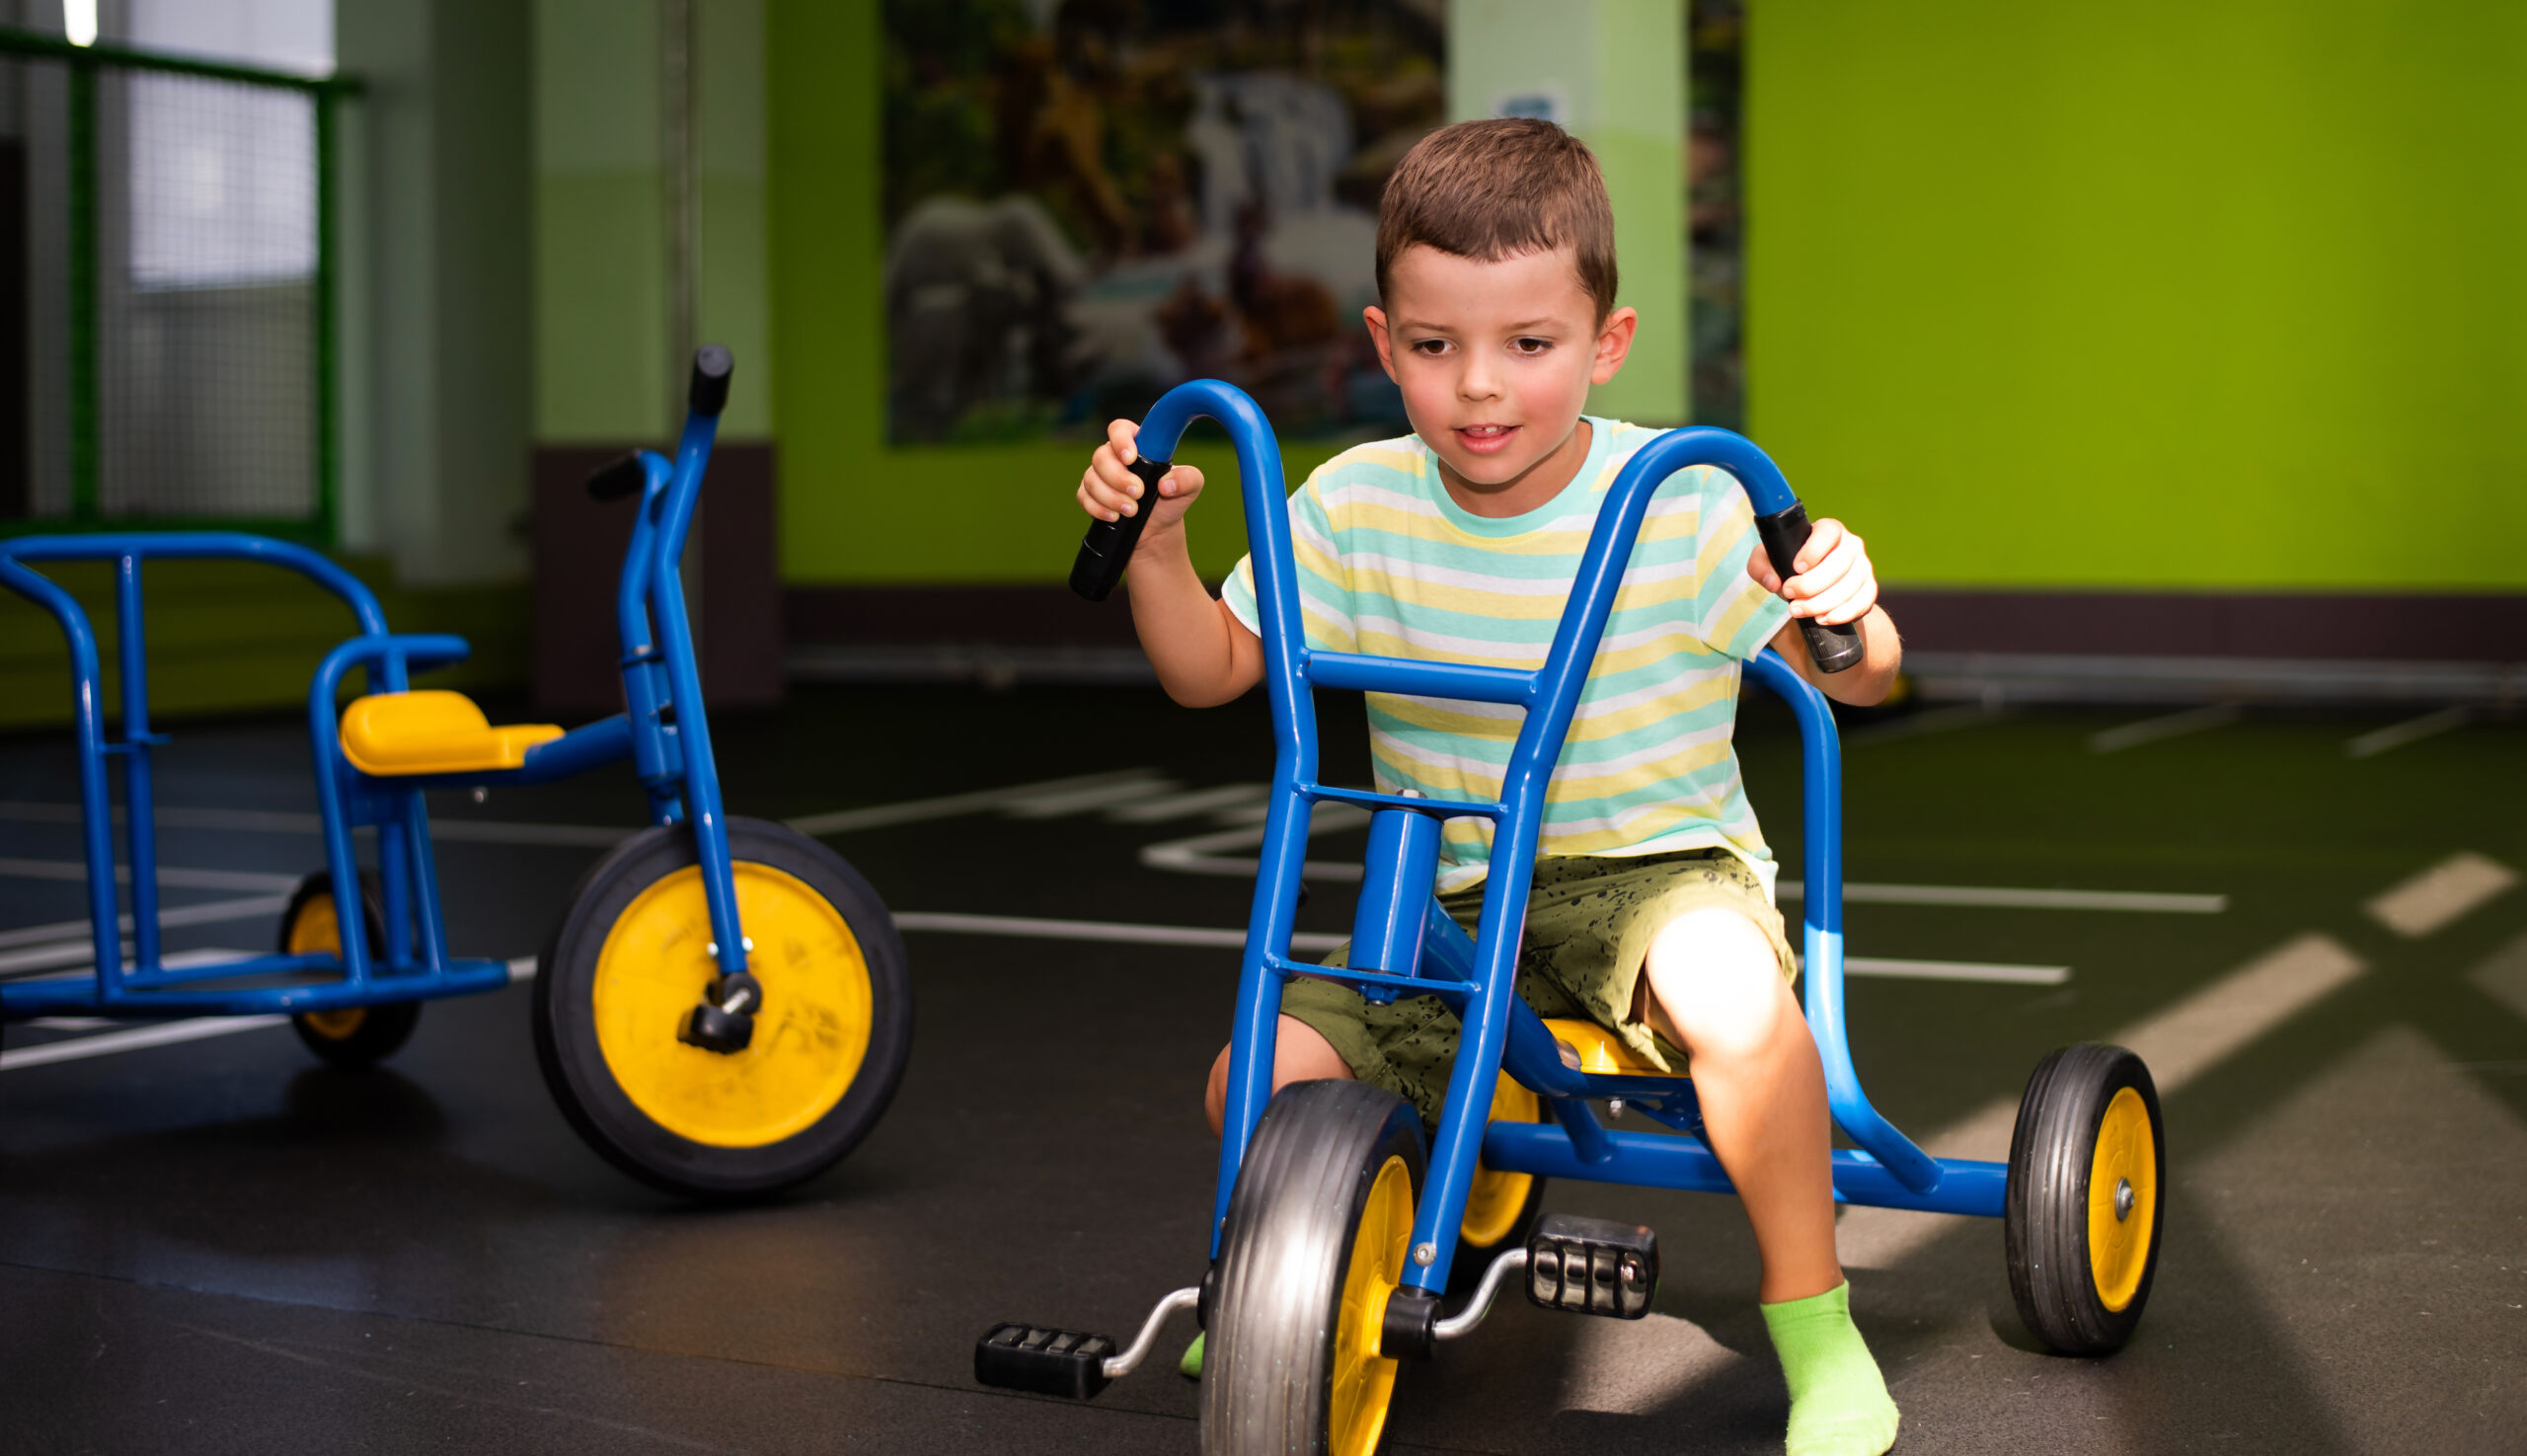 Boy on a tricycle in an indoor gross motor area.